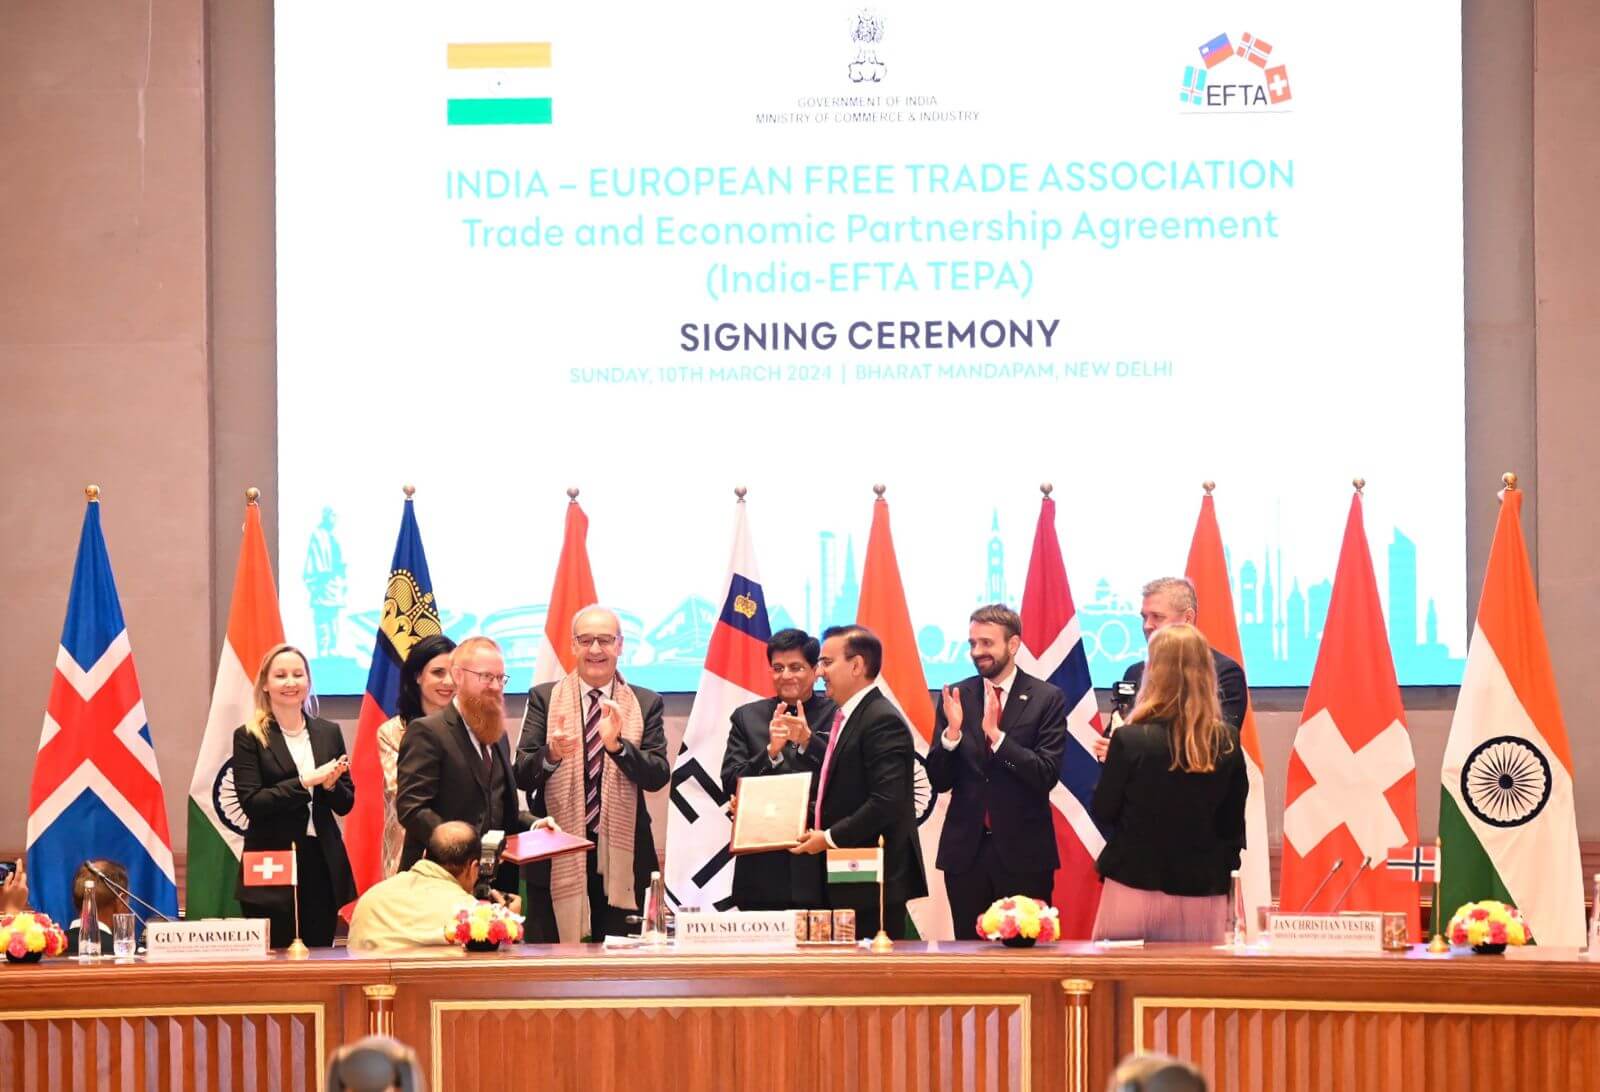 India Signs Landmark Trade Pact with EFTA, Secures $100 Billion Investment Pledge